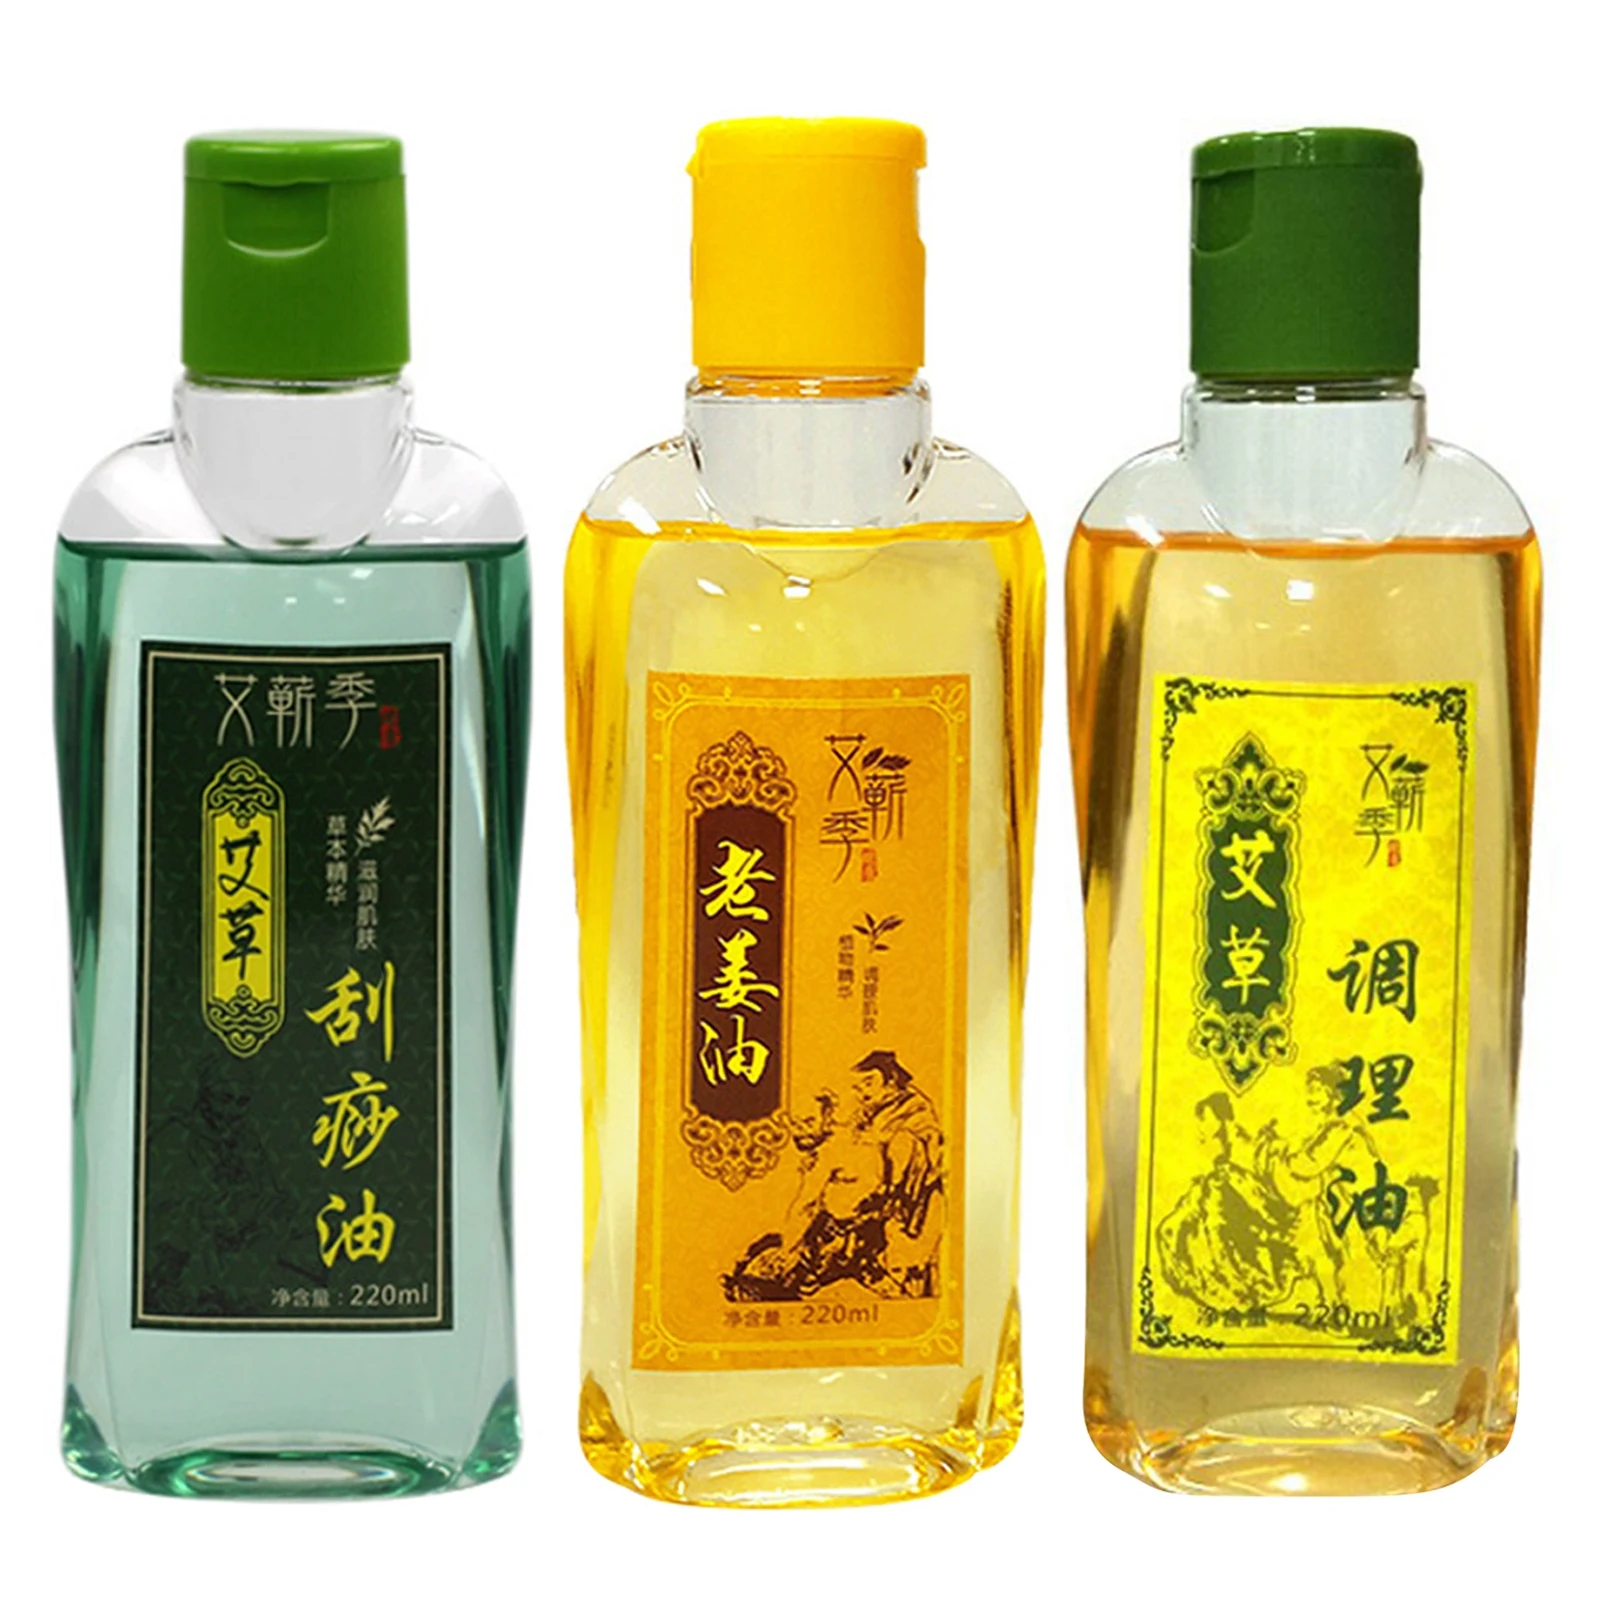 

220ML Argy Wormwood Ginger Massage Essential Oil Scraping Stress Relief Body Massage Oil For Scrape Therapy SPA Body Care